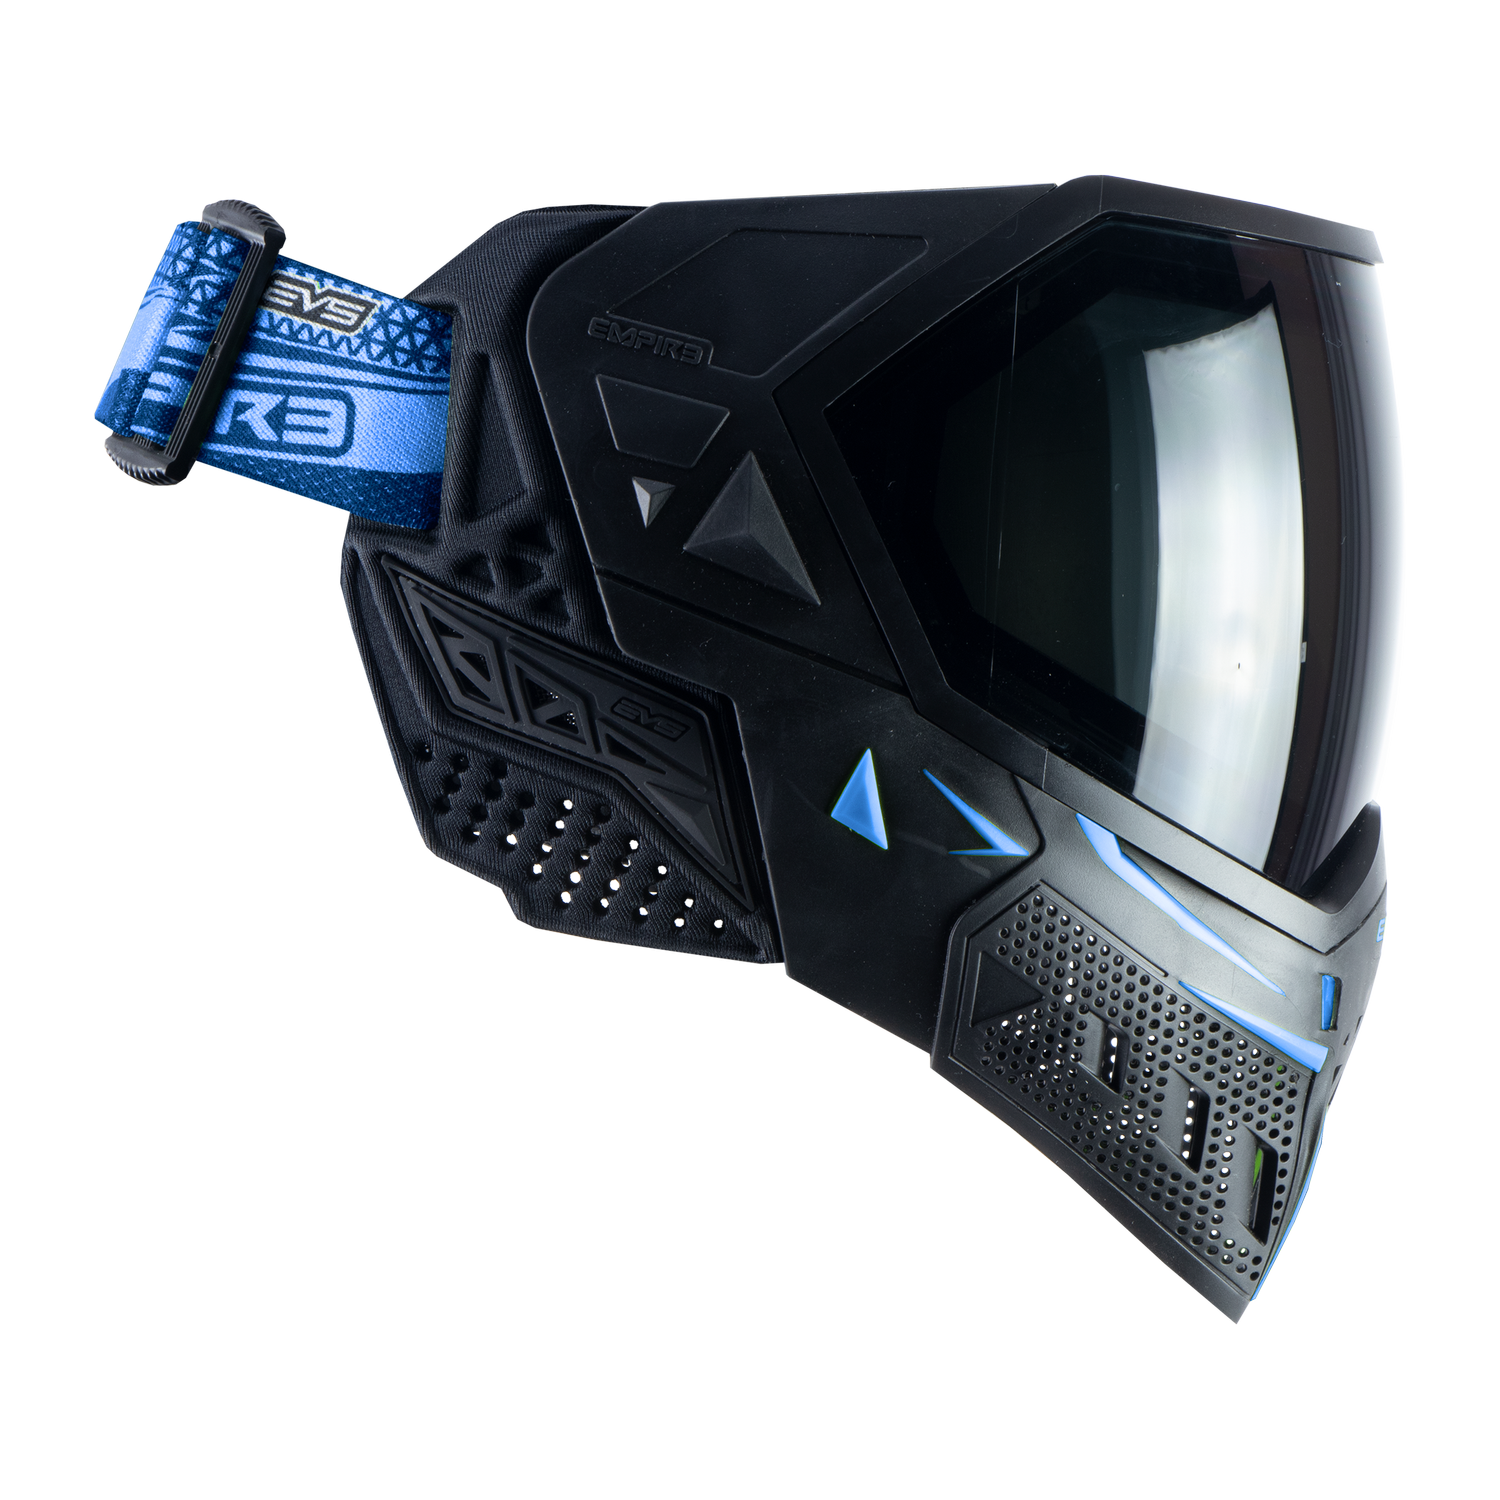 Empire EVS Goggle SE Black / Blue - Thermal Ninja Lens - Eminent Paintball And Airsoft